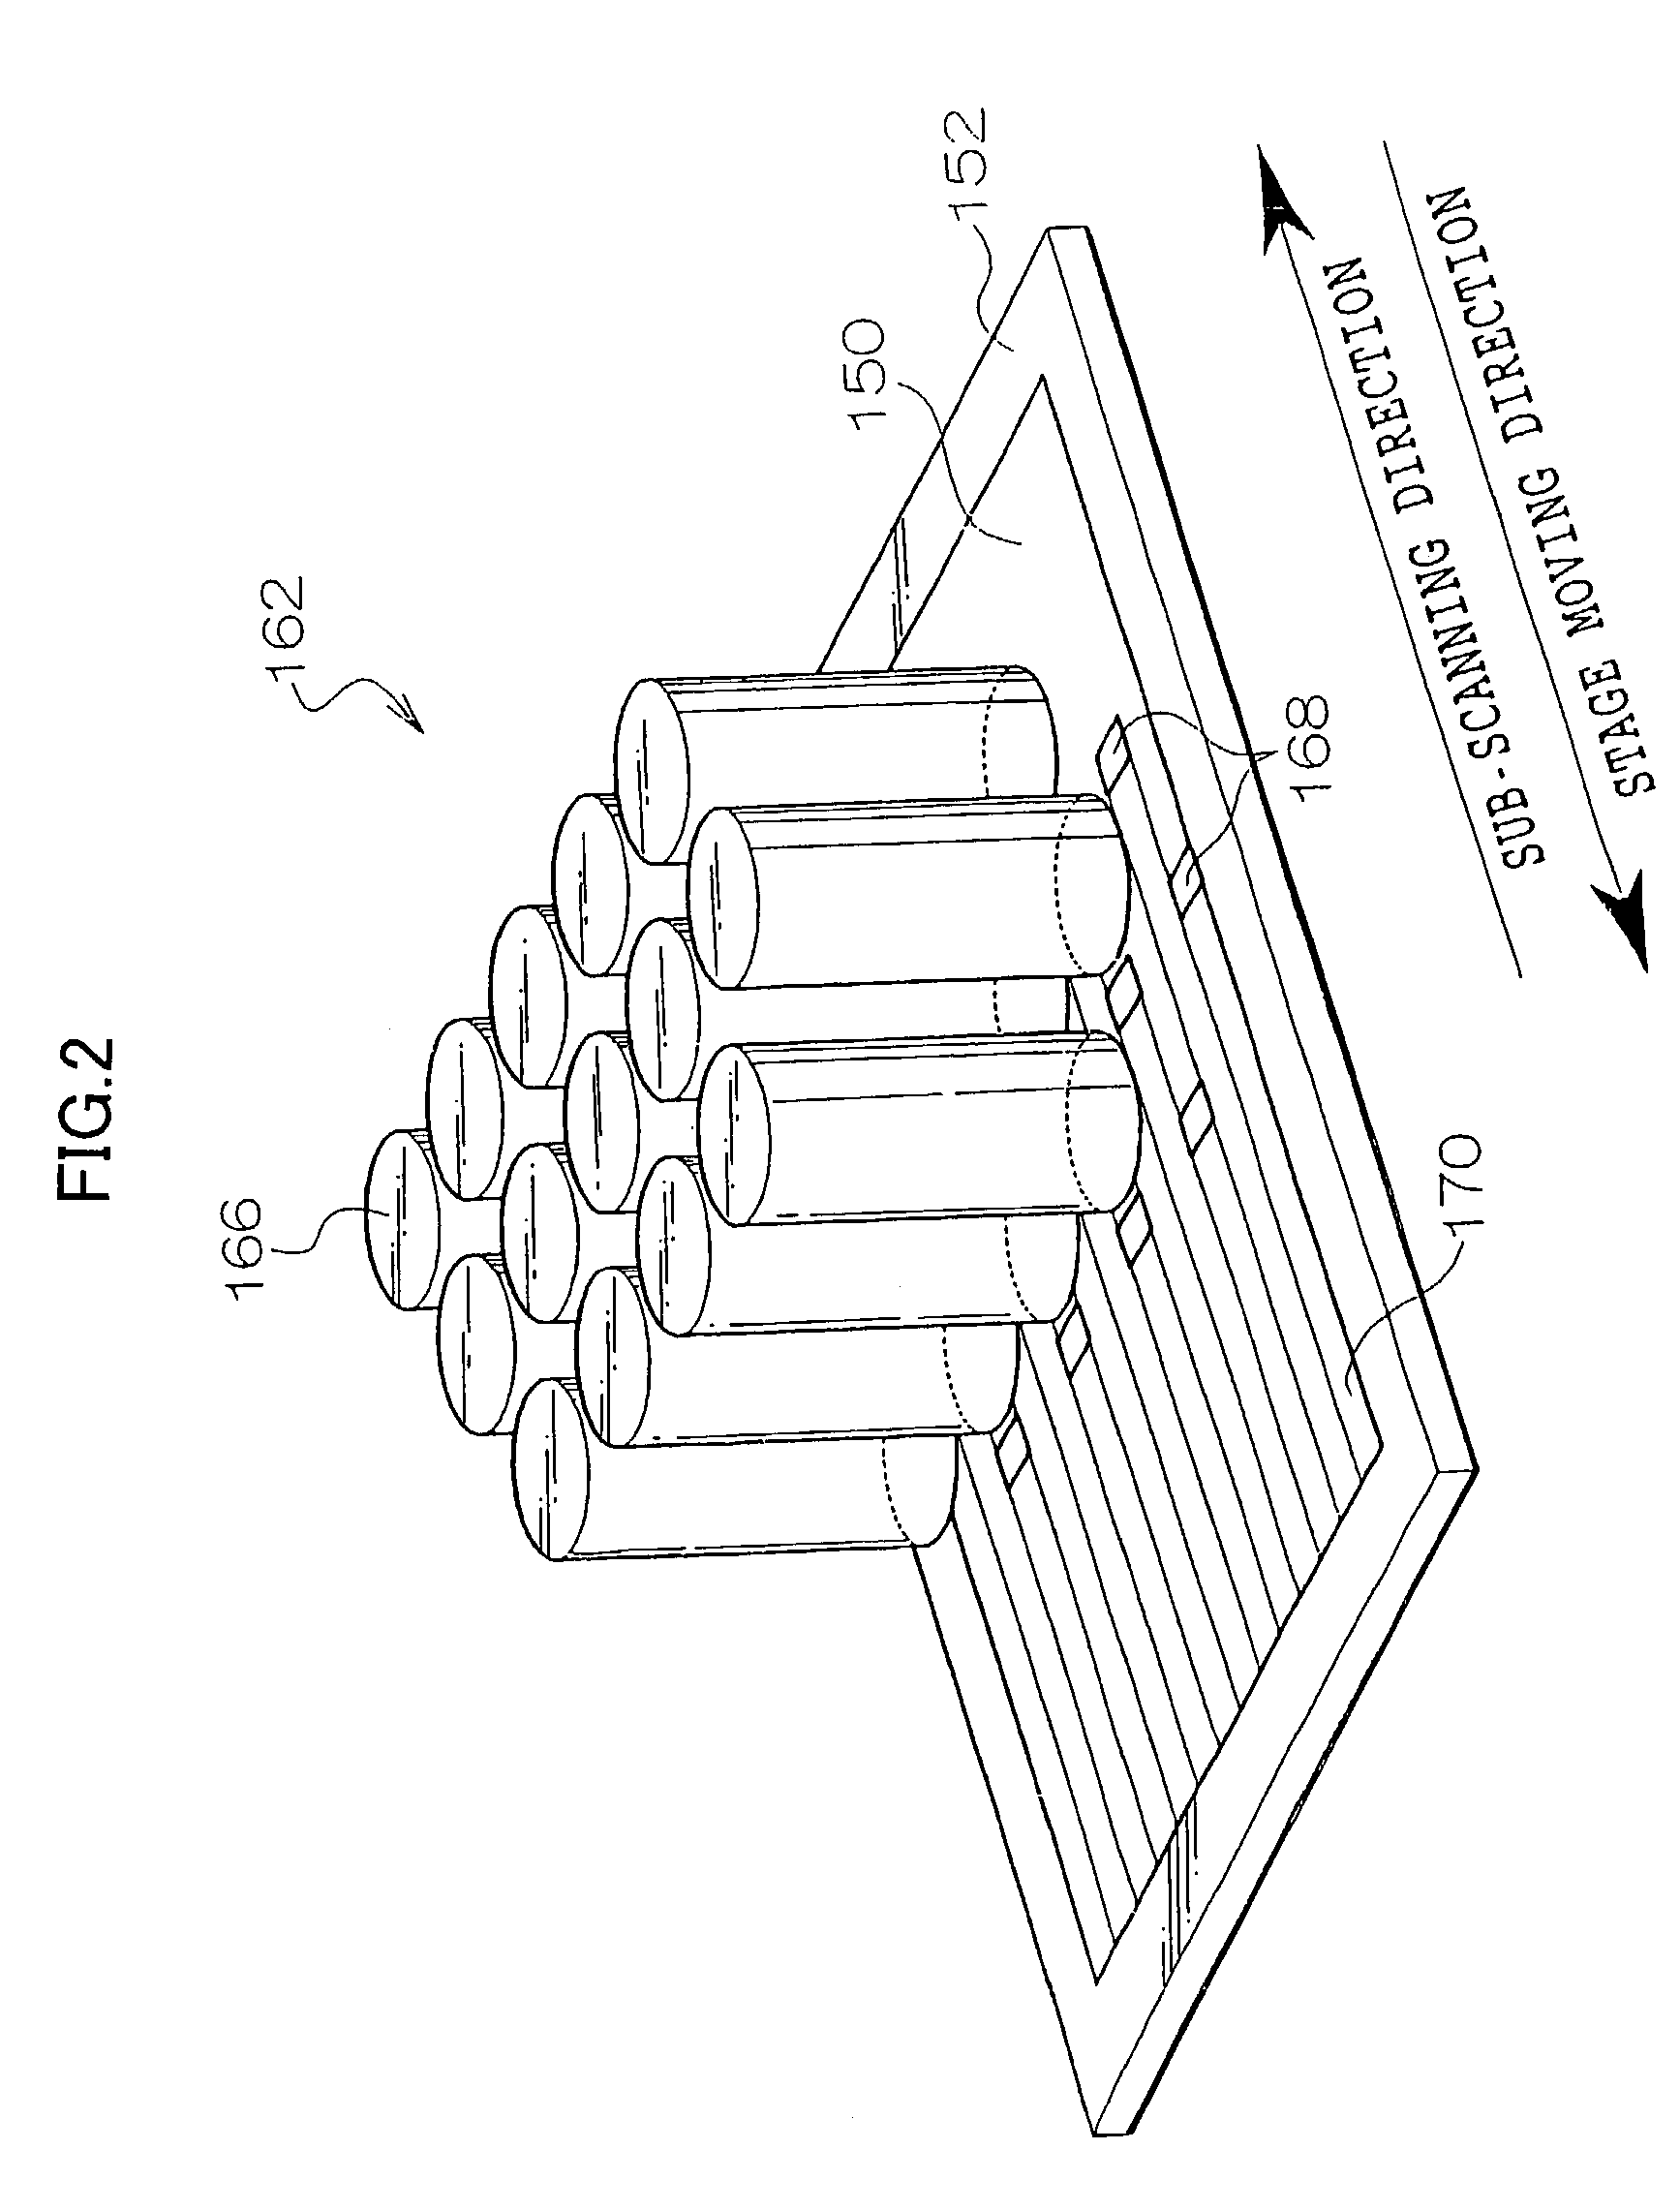 Optical wiring substrate fabrication process and optical wiring substrate device